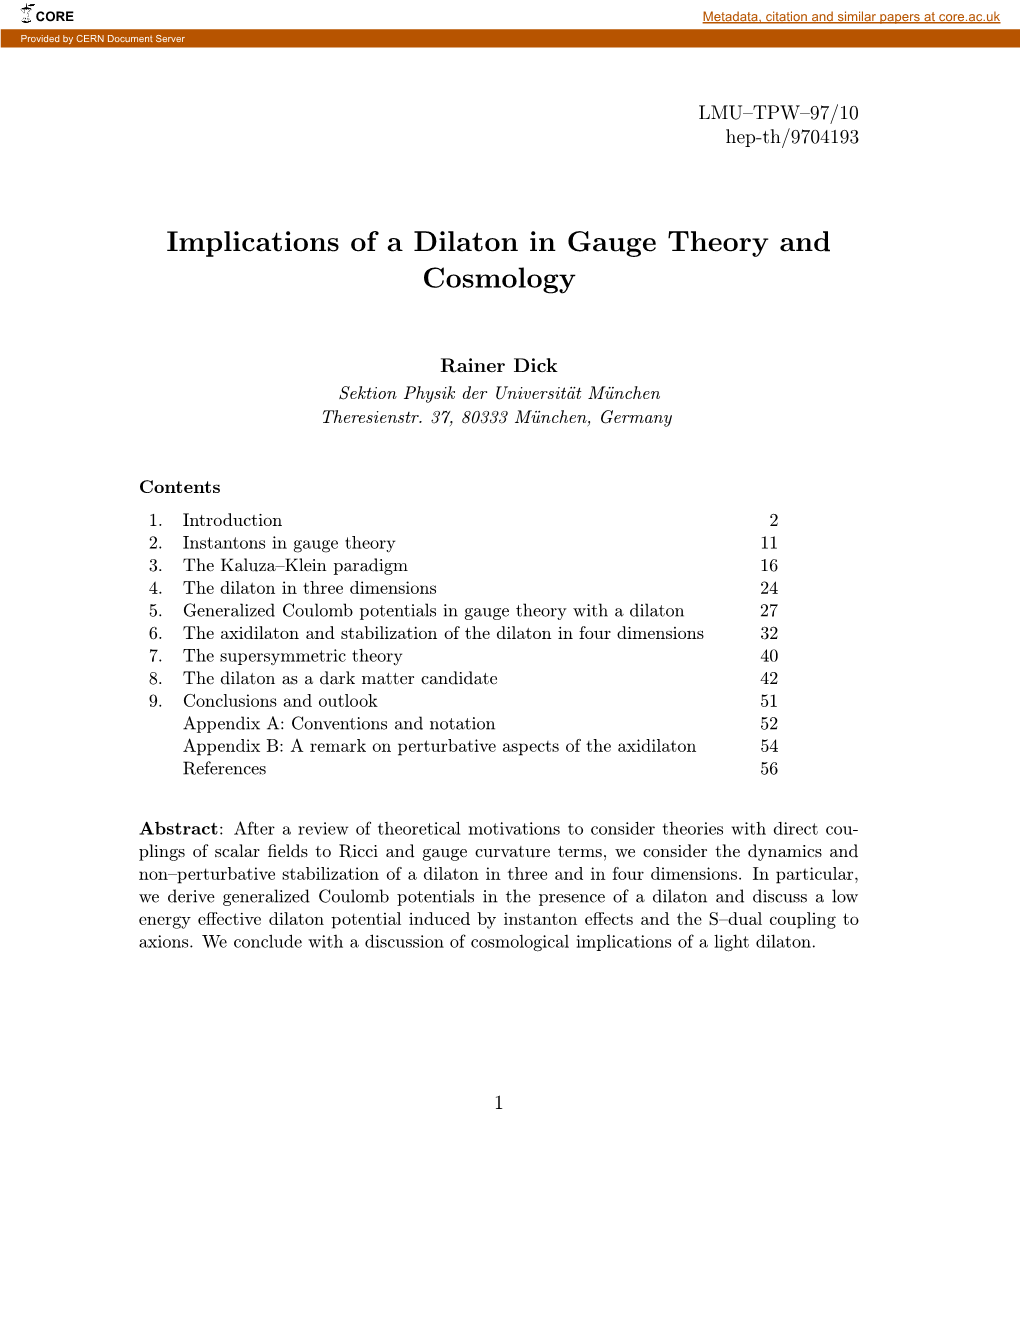 Implications of a Dilaton in Gauge Theory and Cosmology